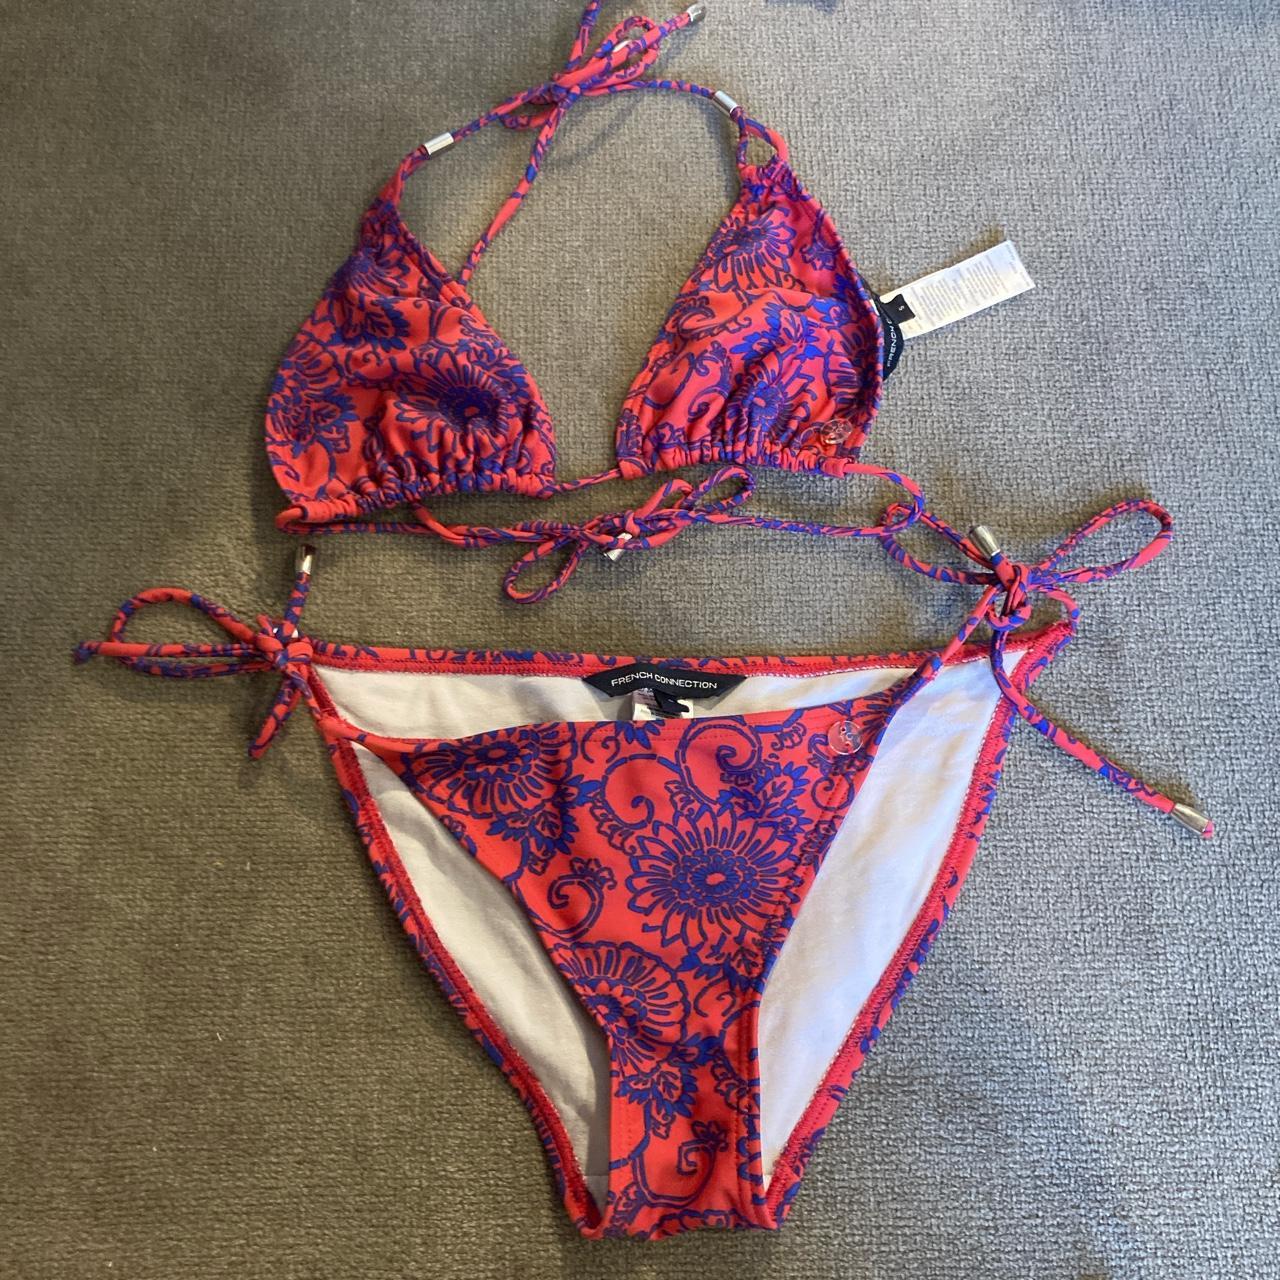 French Connection Women's Bikinis-and-tankini-sets | Depop